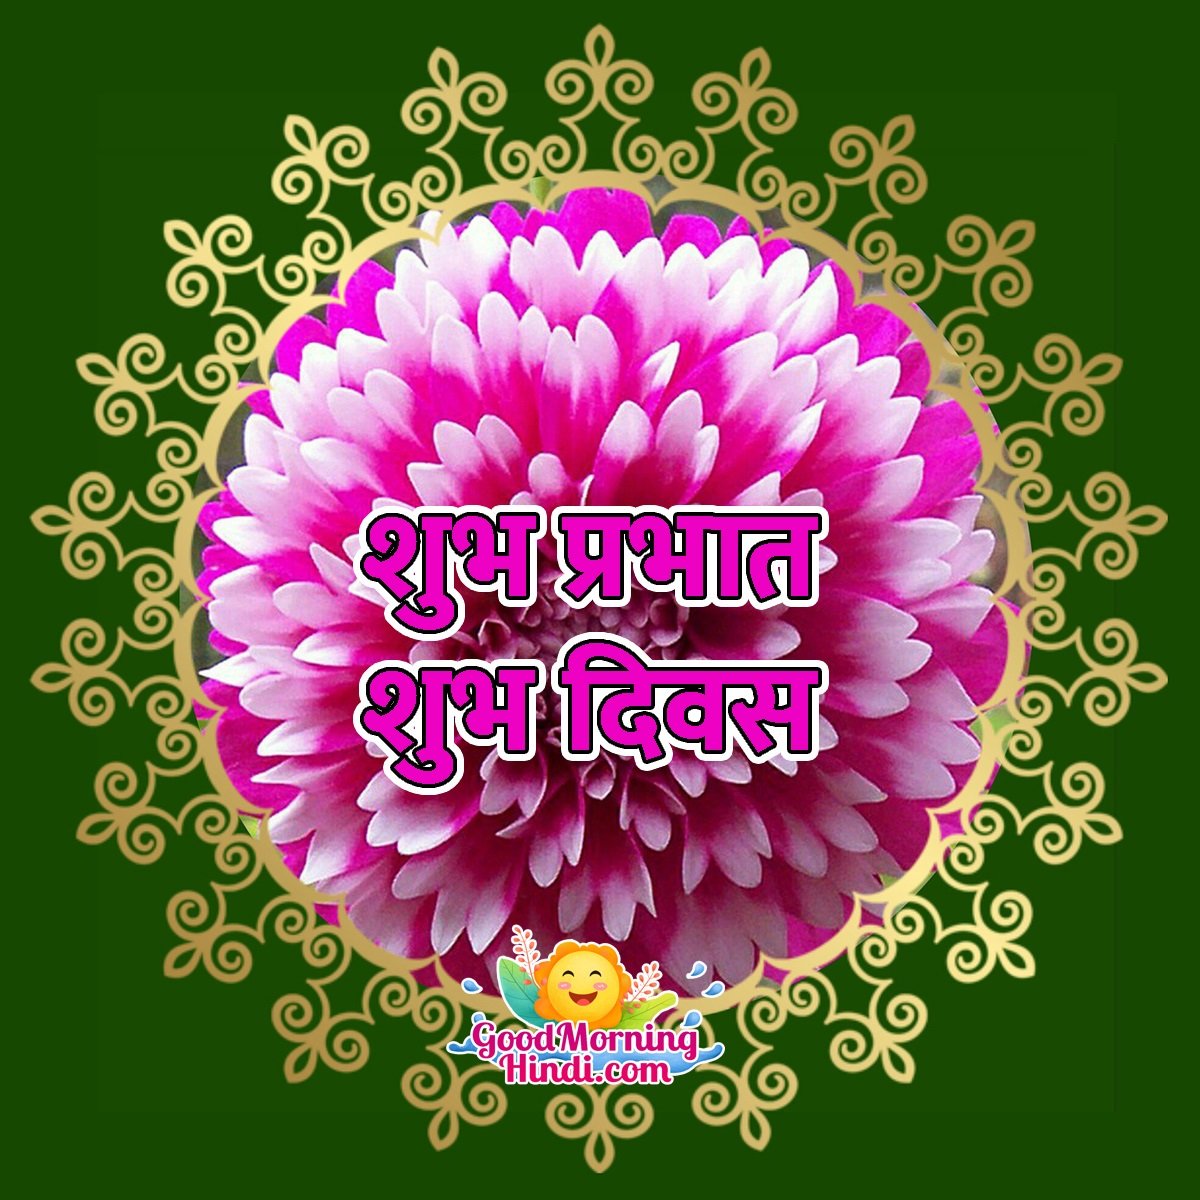 Good Morning Hindi Flowers Images - Good Morning Wishes & Images In Hindi